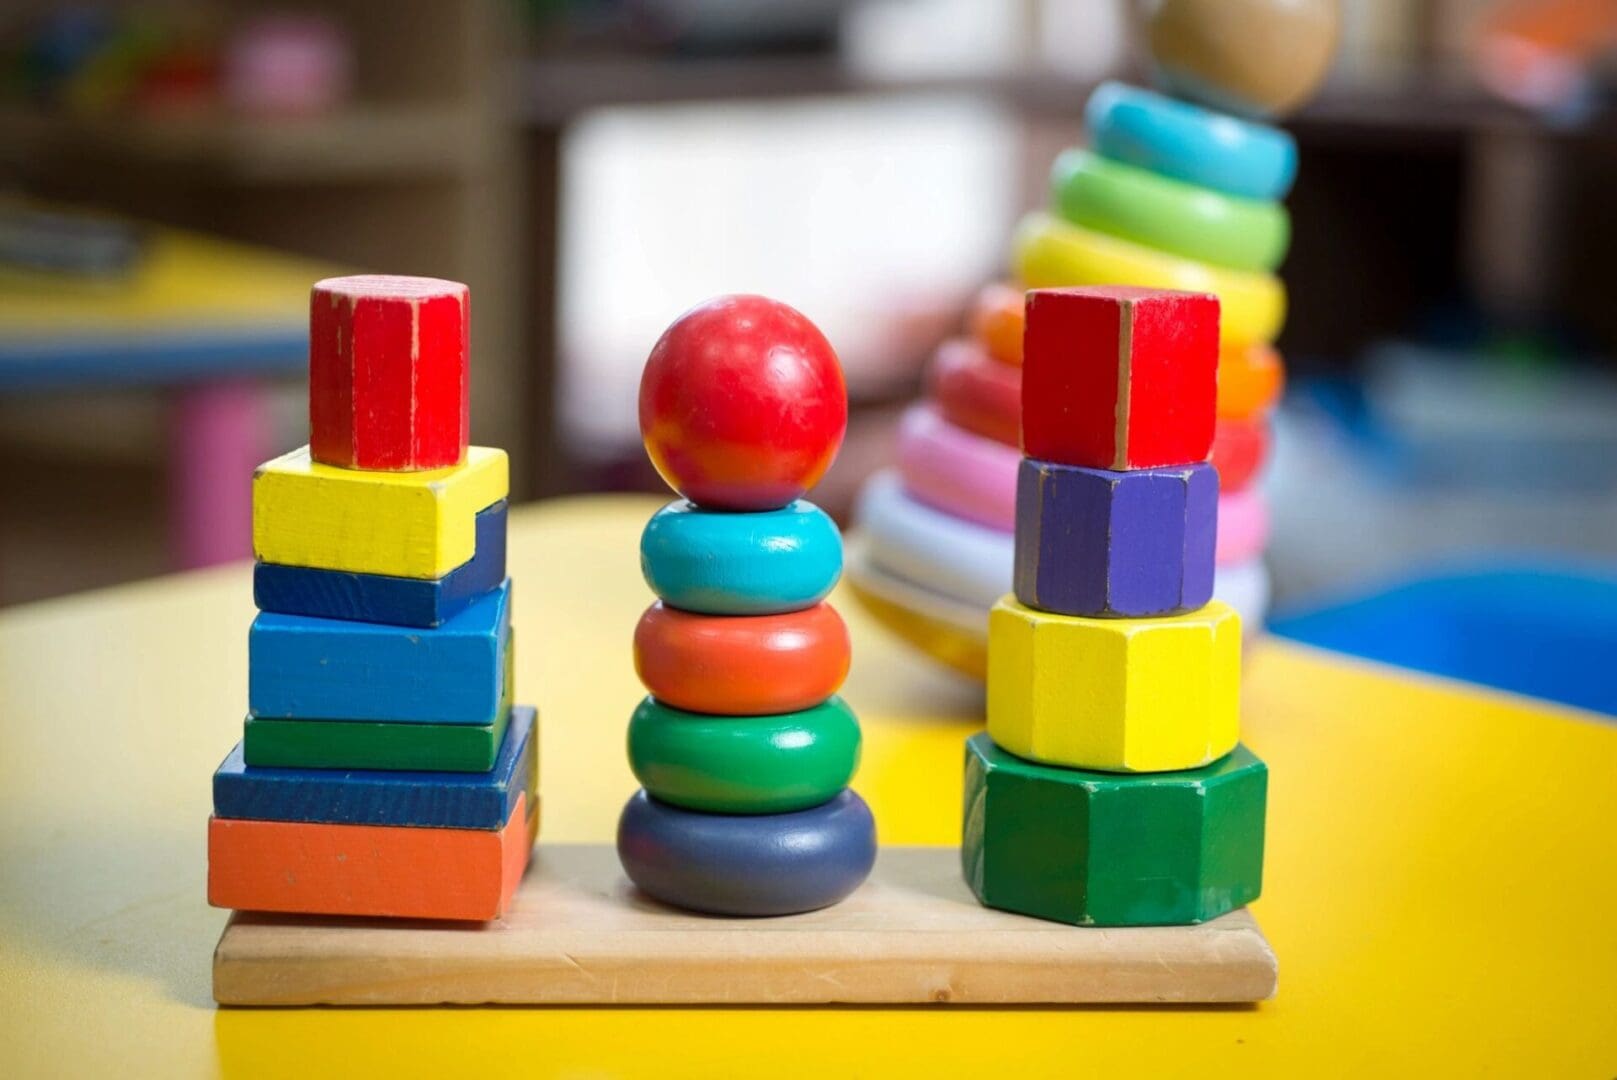 A stack of colorful blocks on a table in a child's playroom.